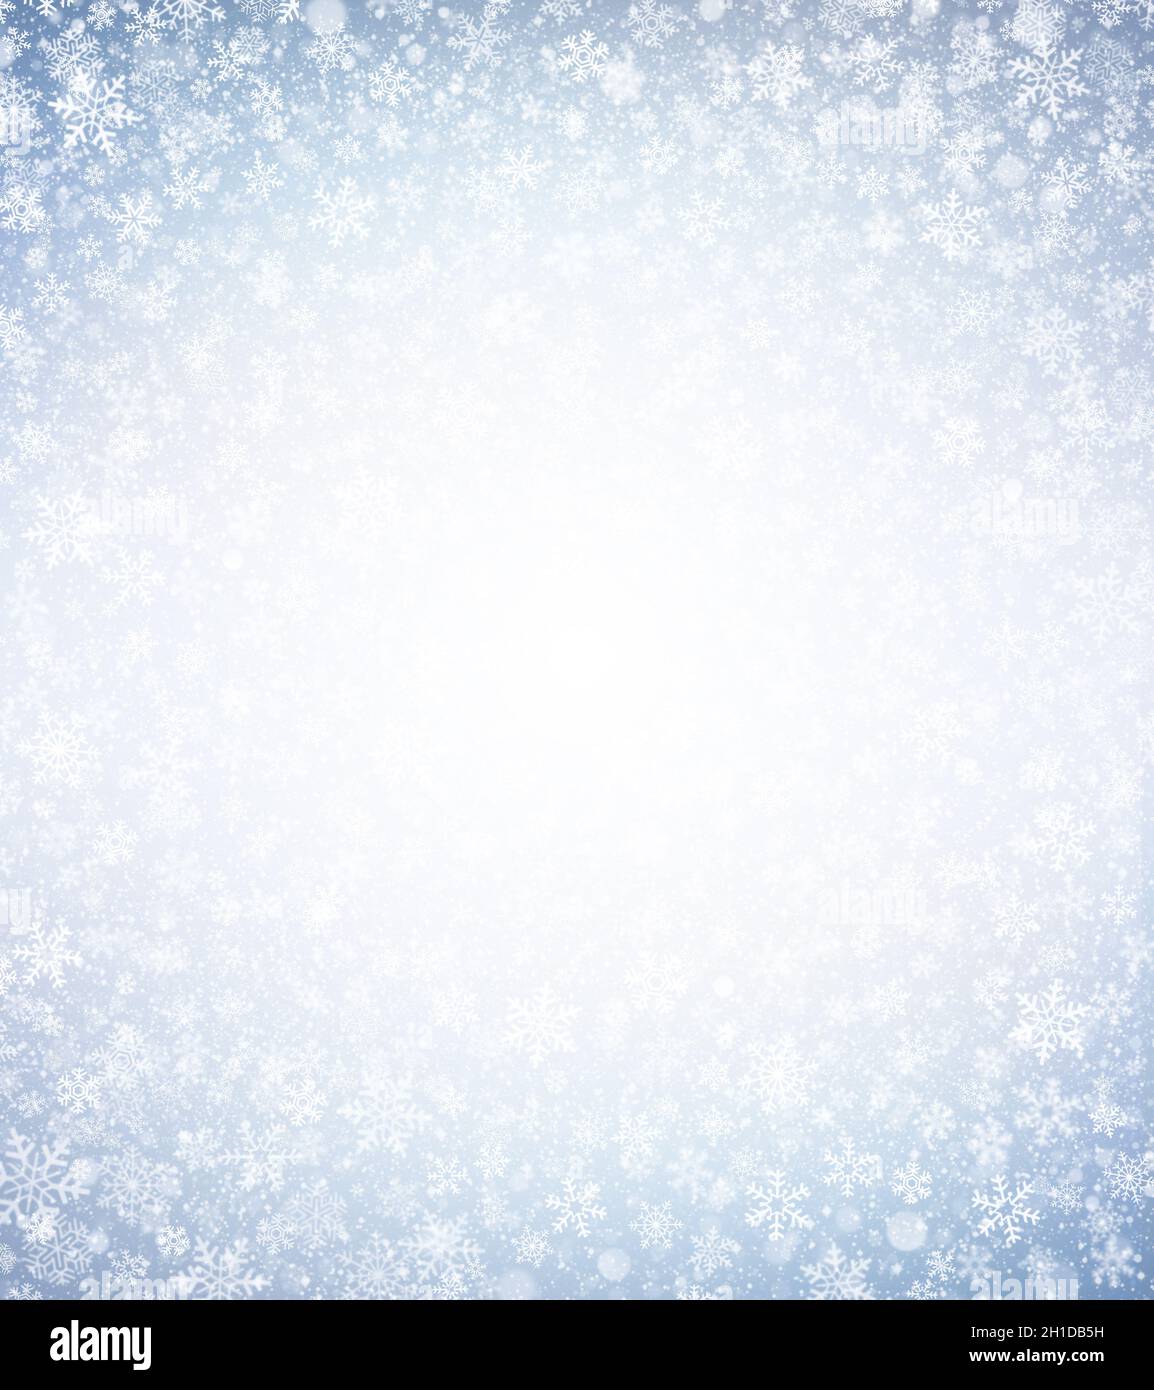 White snowflakes shapes and snow exploding on a silver blue winter background. Christmas season material. Stock Photo